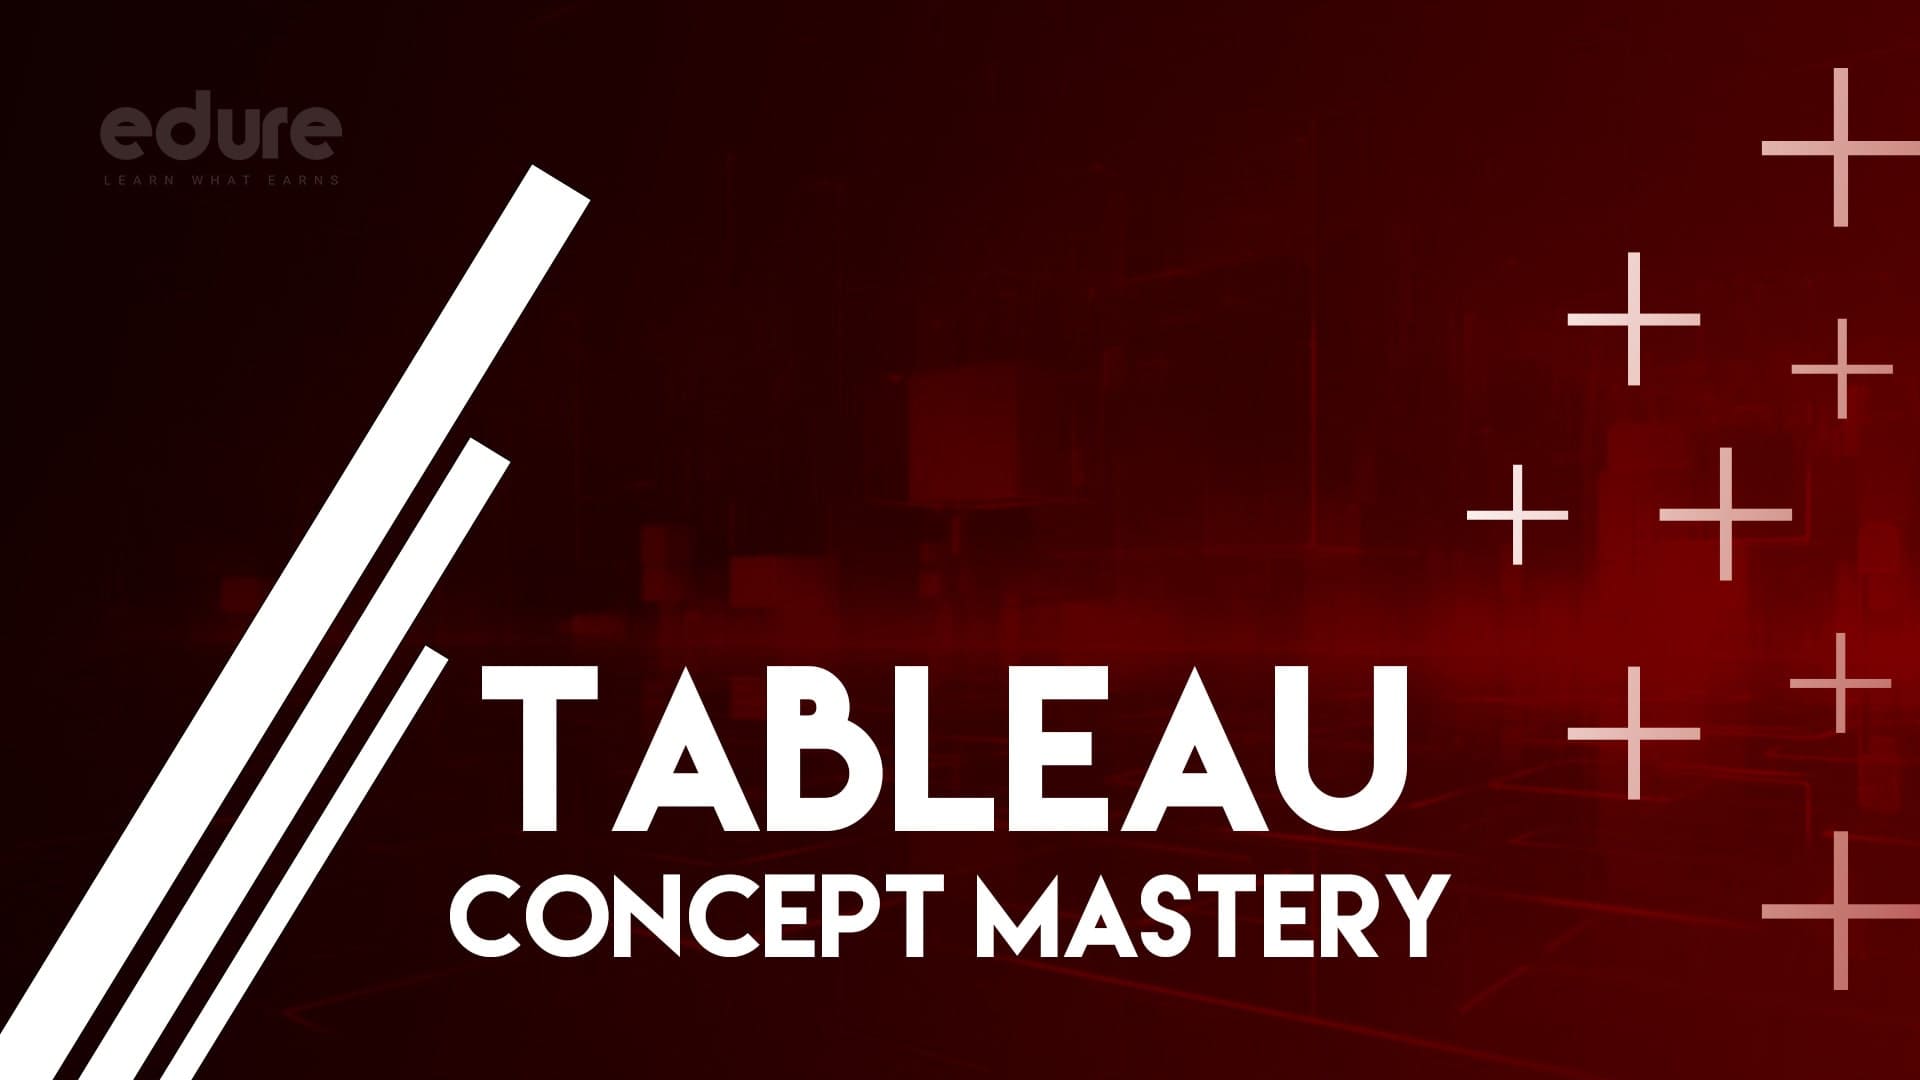 Tableau Concept Mastery